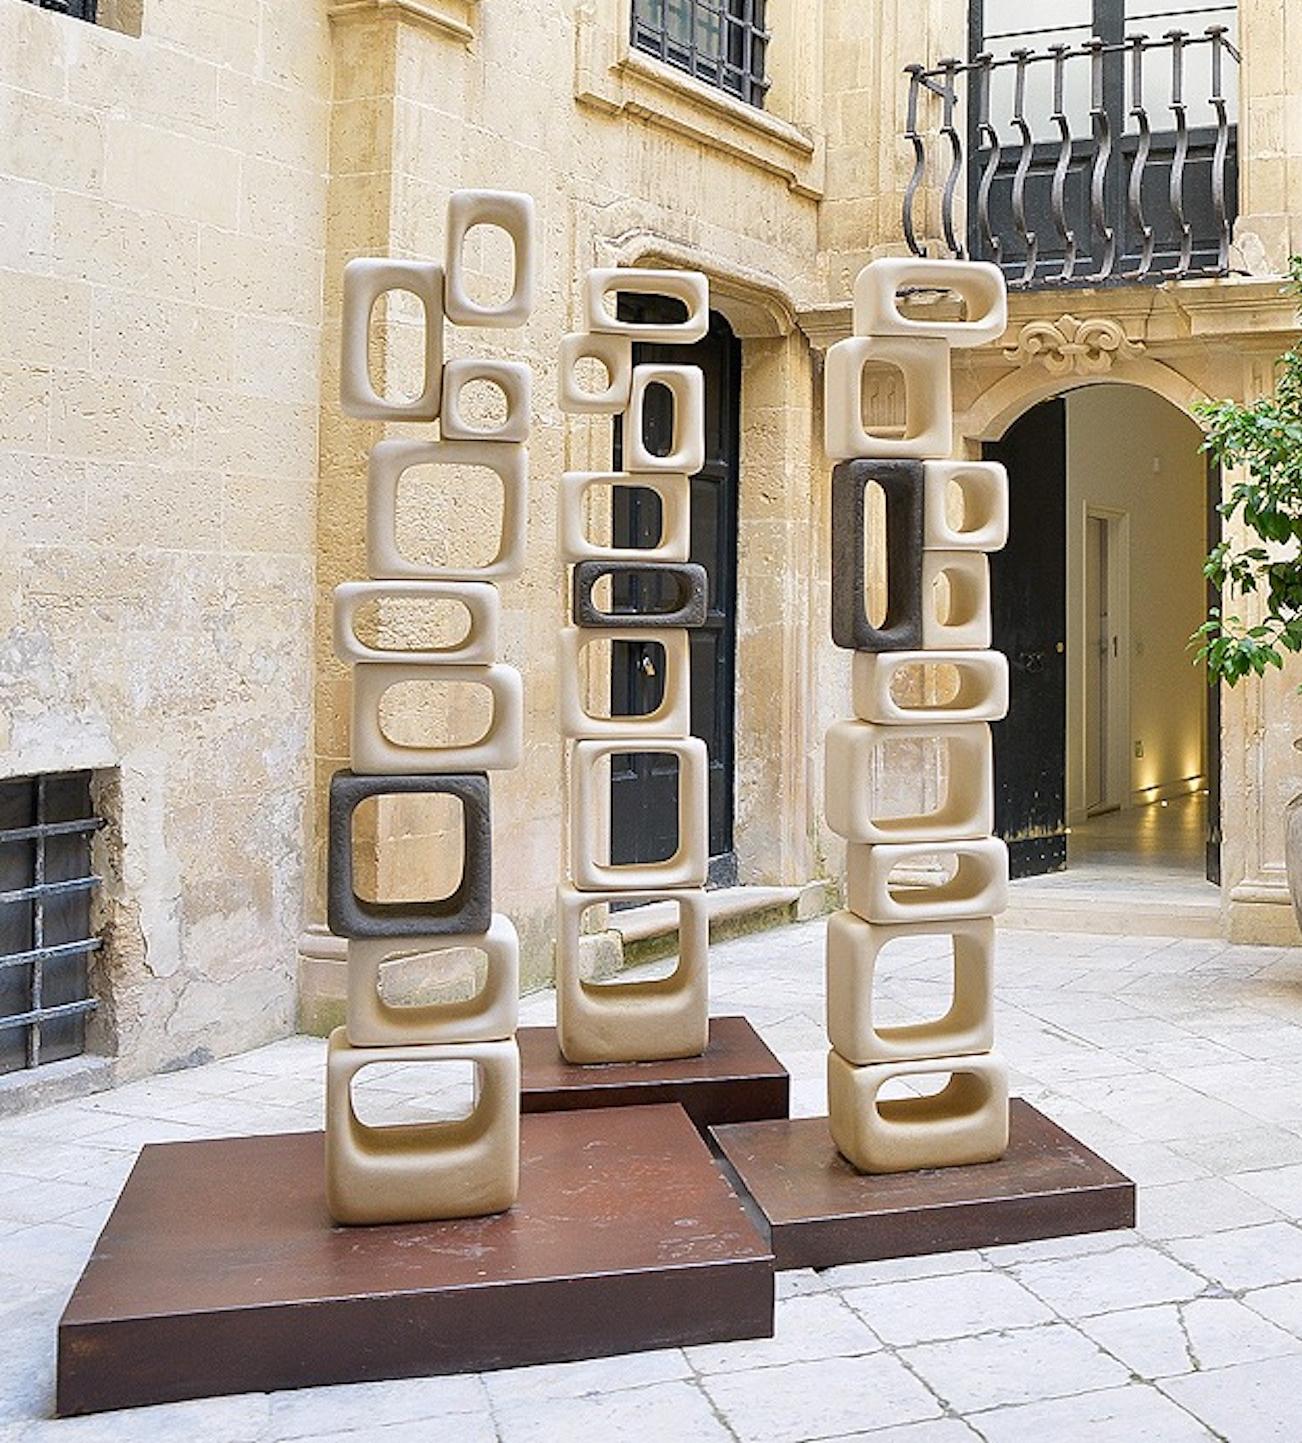 21st Century abstract sculpture NIURA by Renzo Buttazzo from Italy.

Sculpture in Lecce Stone
Delivered with a certificate of authenticity (dated & signed)
The illustration photo shows 3 NIURA sculptures.
They are also sold